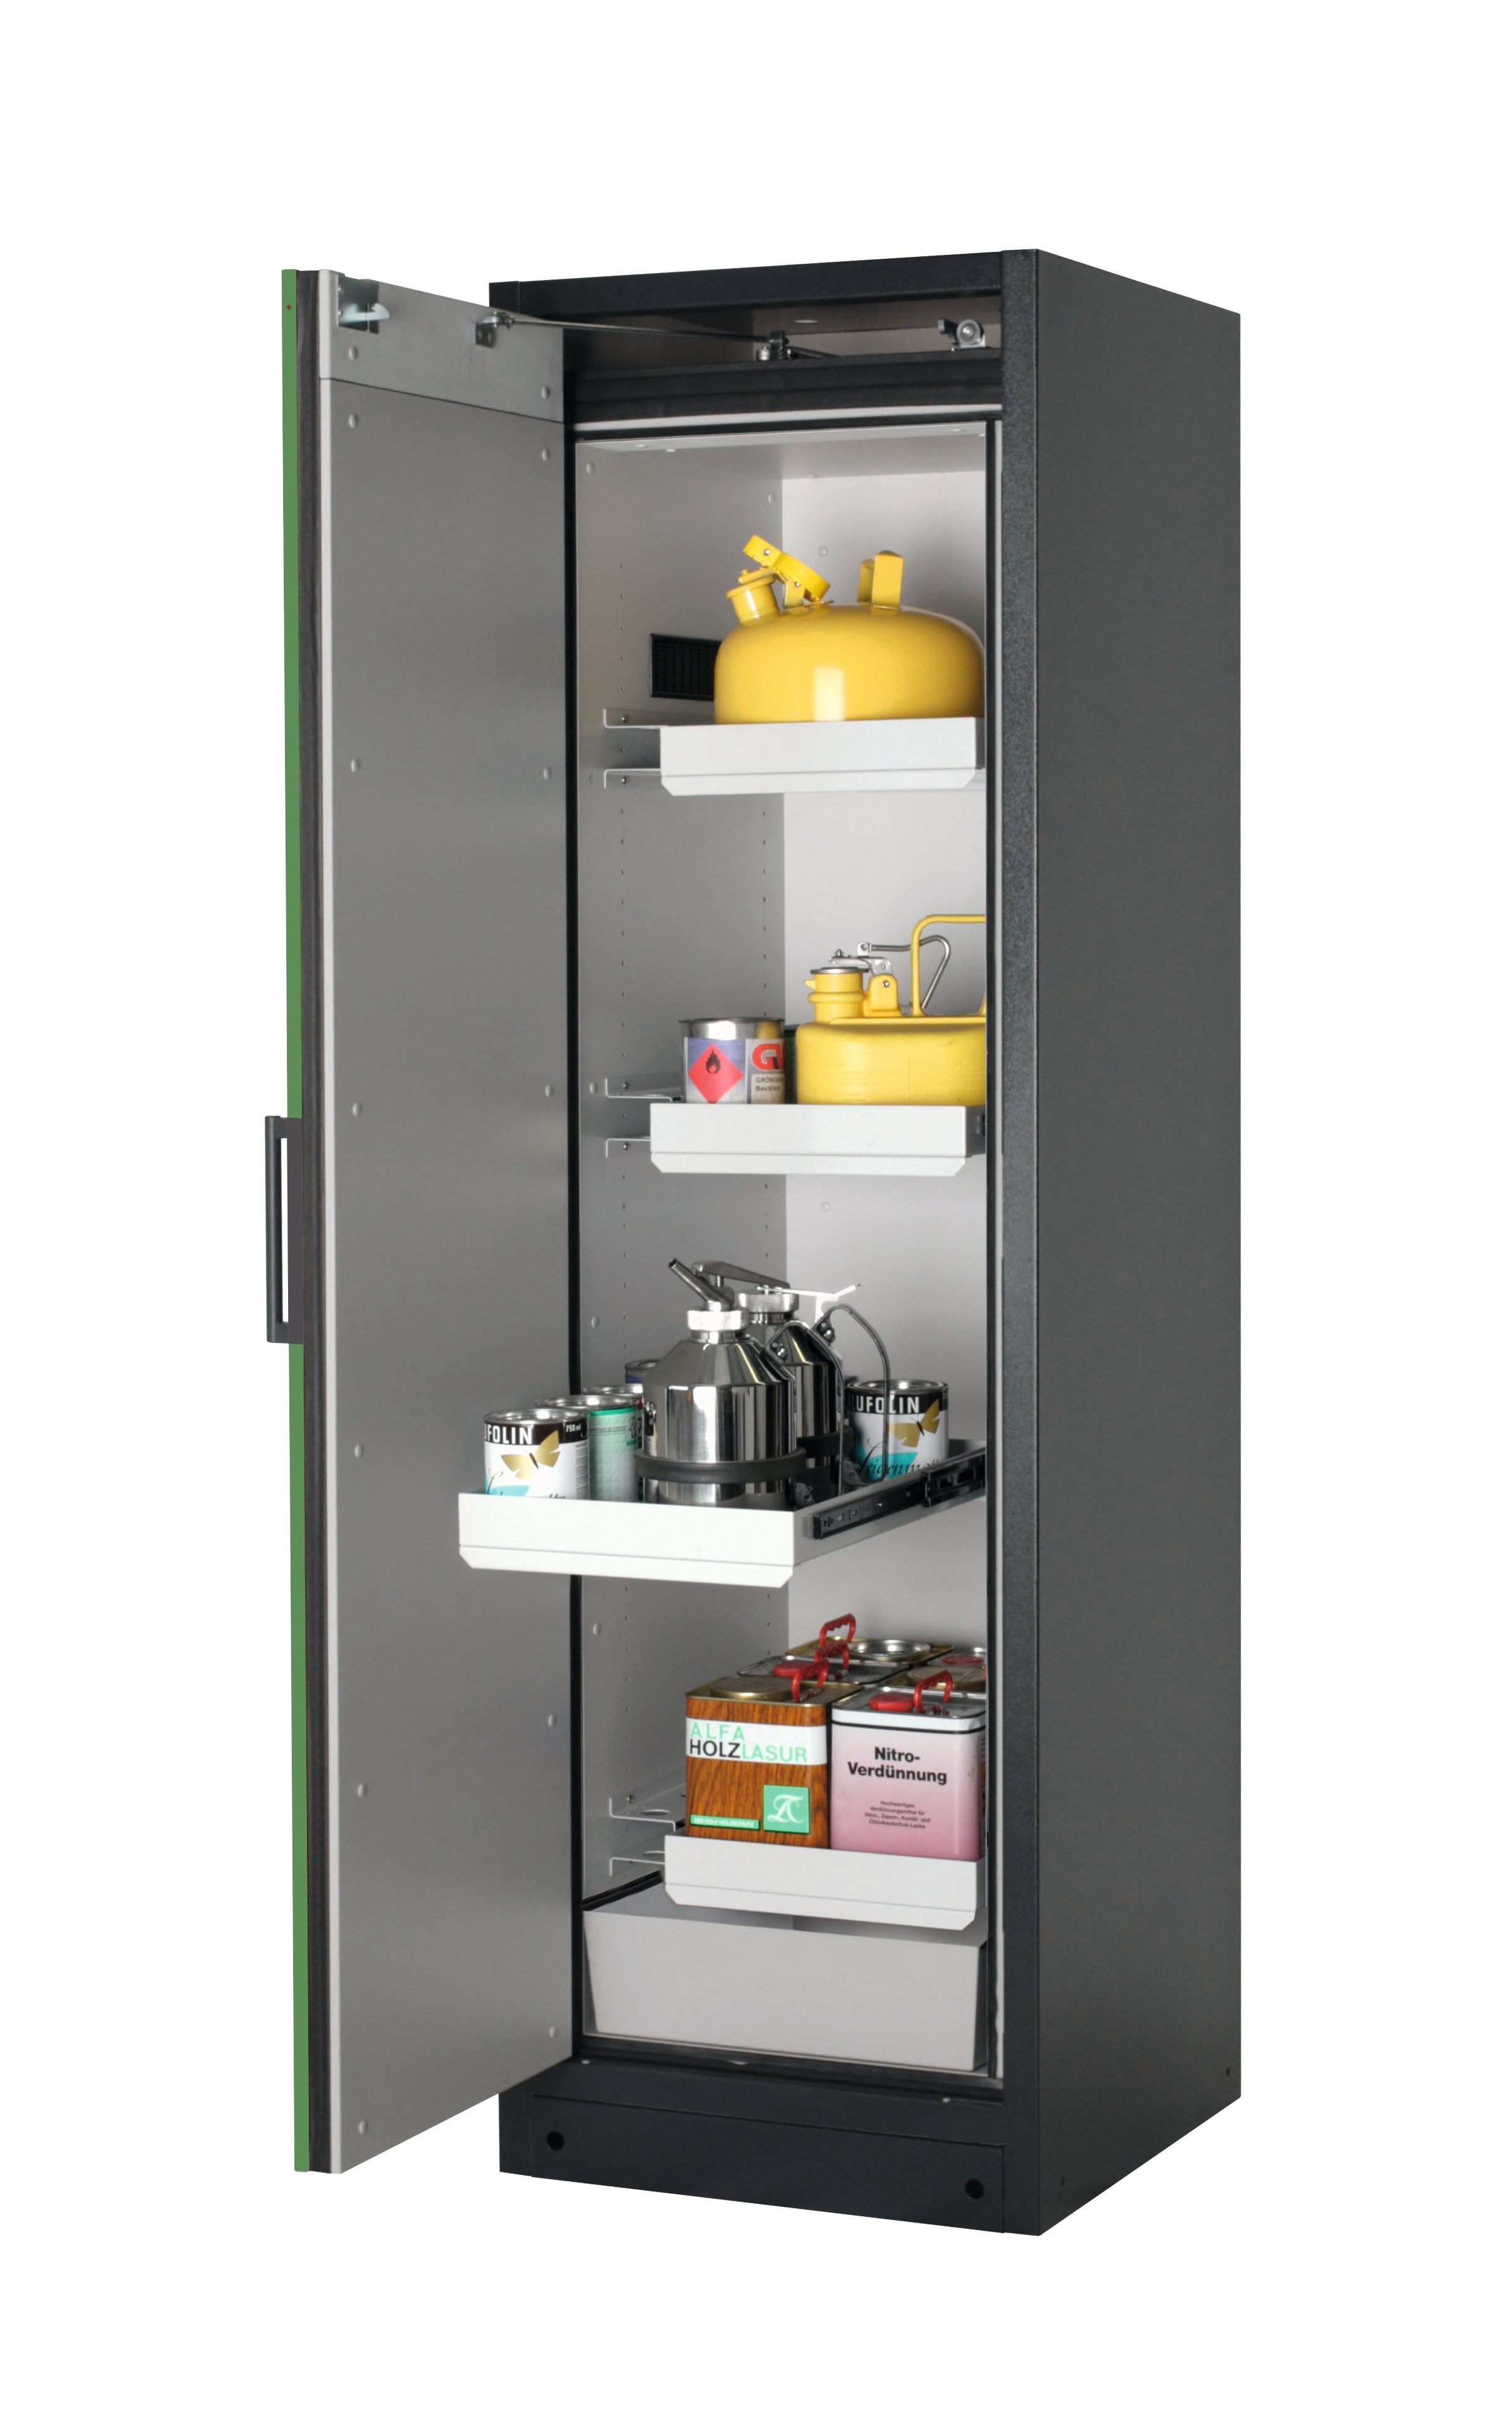 Type 90 safety storage cabinet Q-CLASSIC-90 model Q90.195.060 in reseda green RAL 6011 with 3x drawer (standard) (sheet steel),